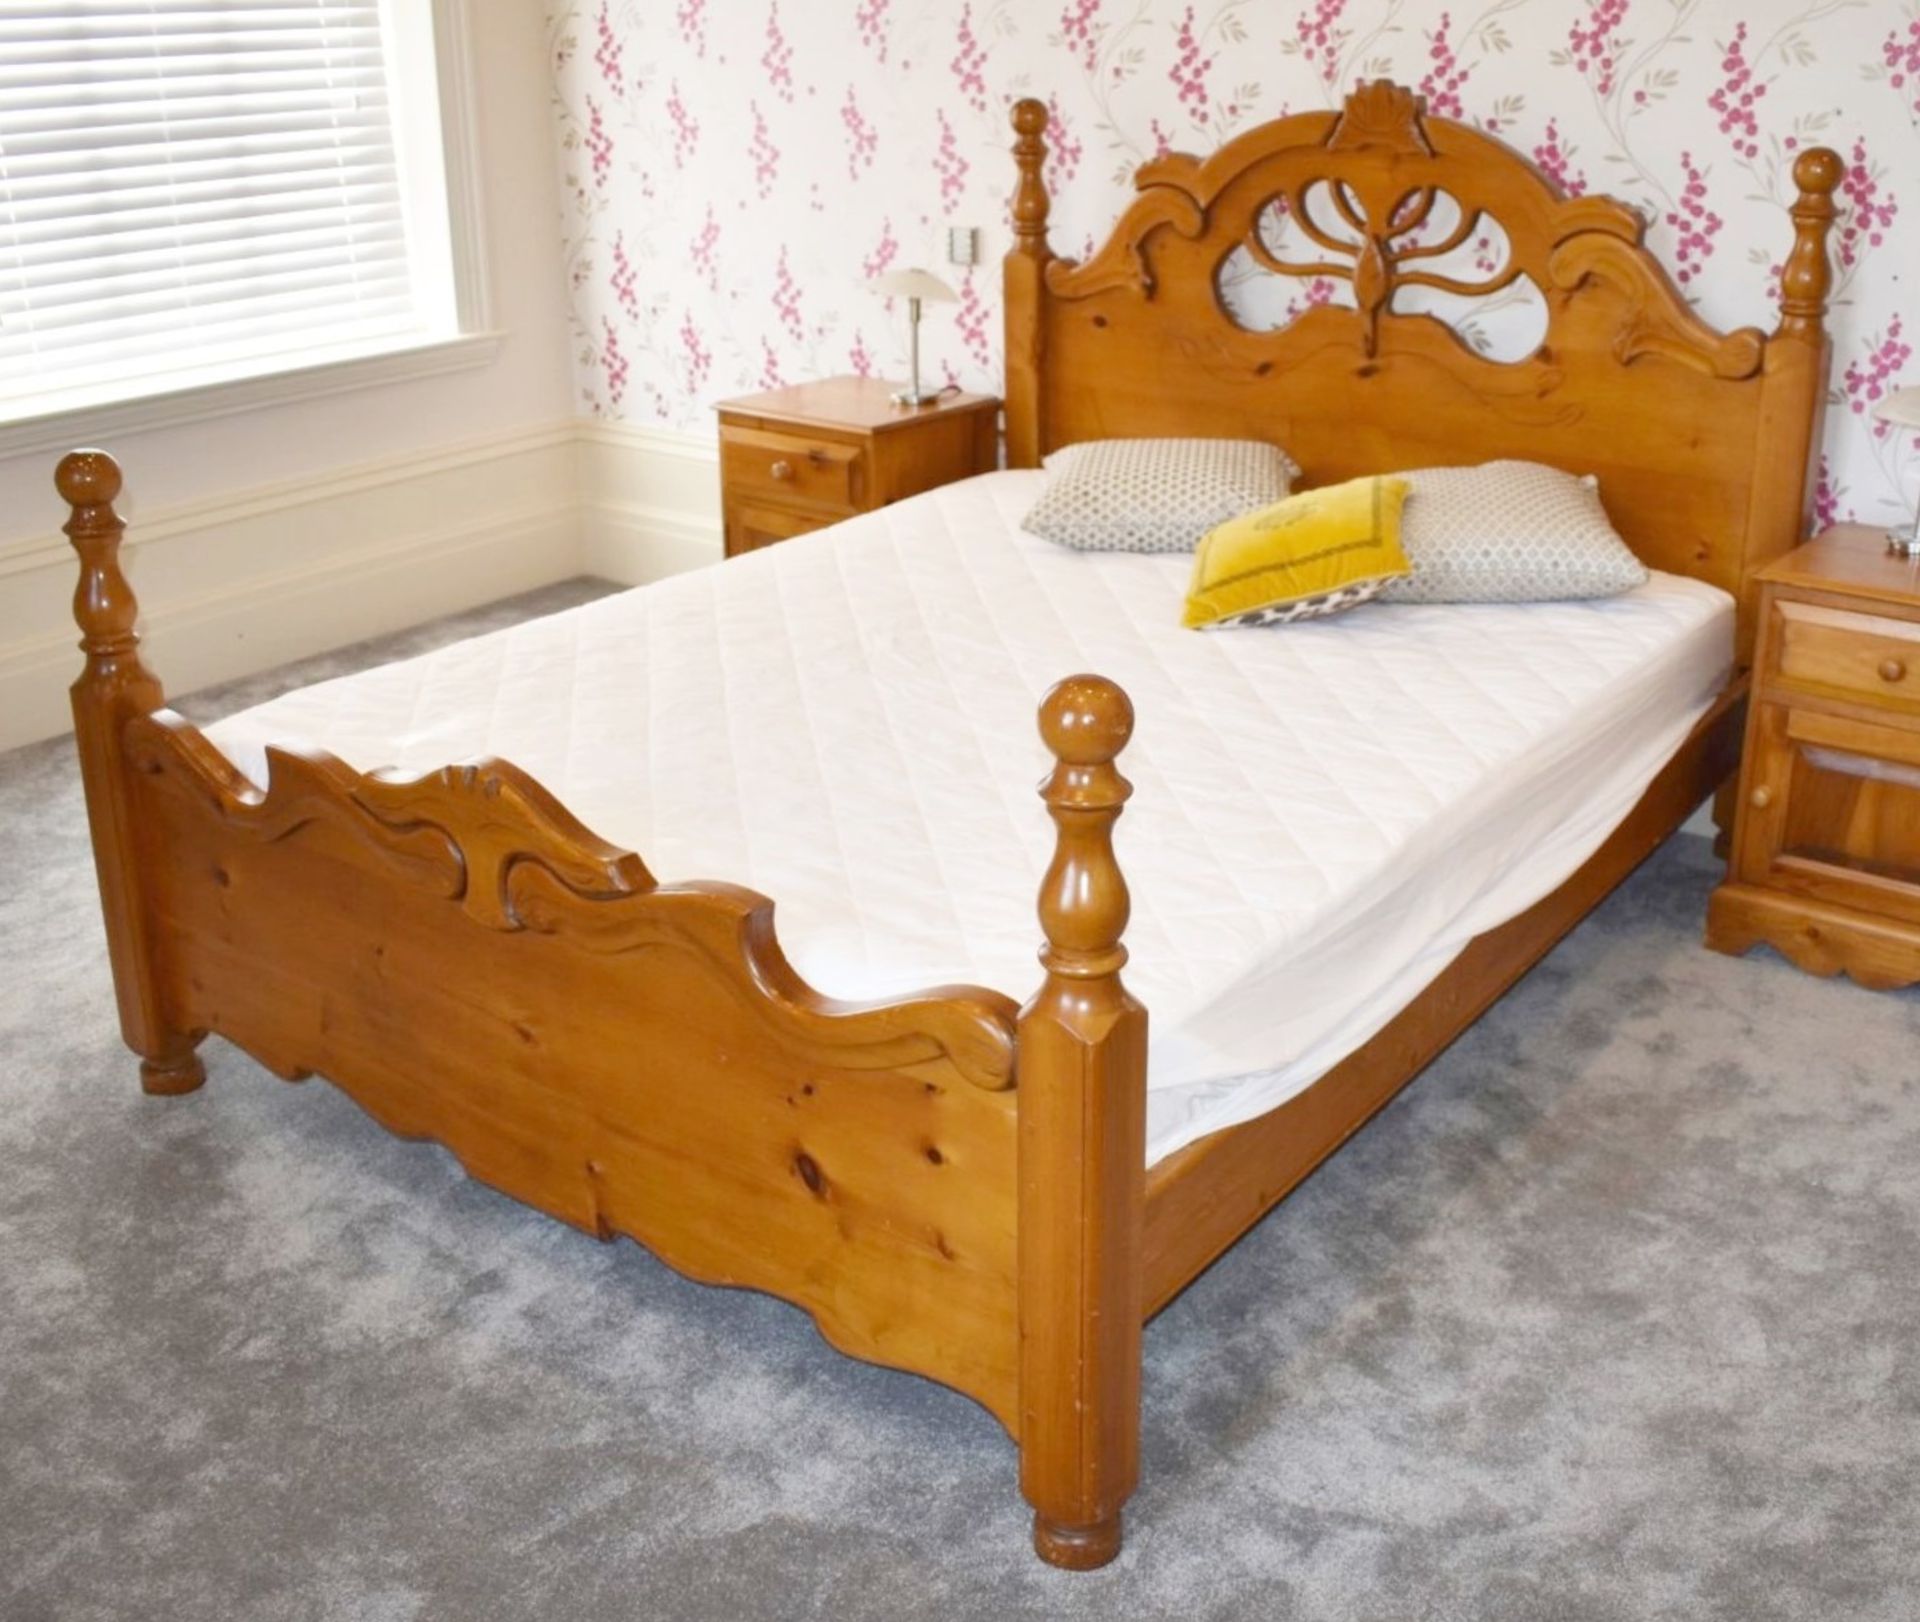 1 x Country Farmhouse Solid Pine Kingsize Bed Frame Featuring An Ornate Headboard & Footboard - NO - Image 2 of 7